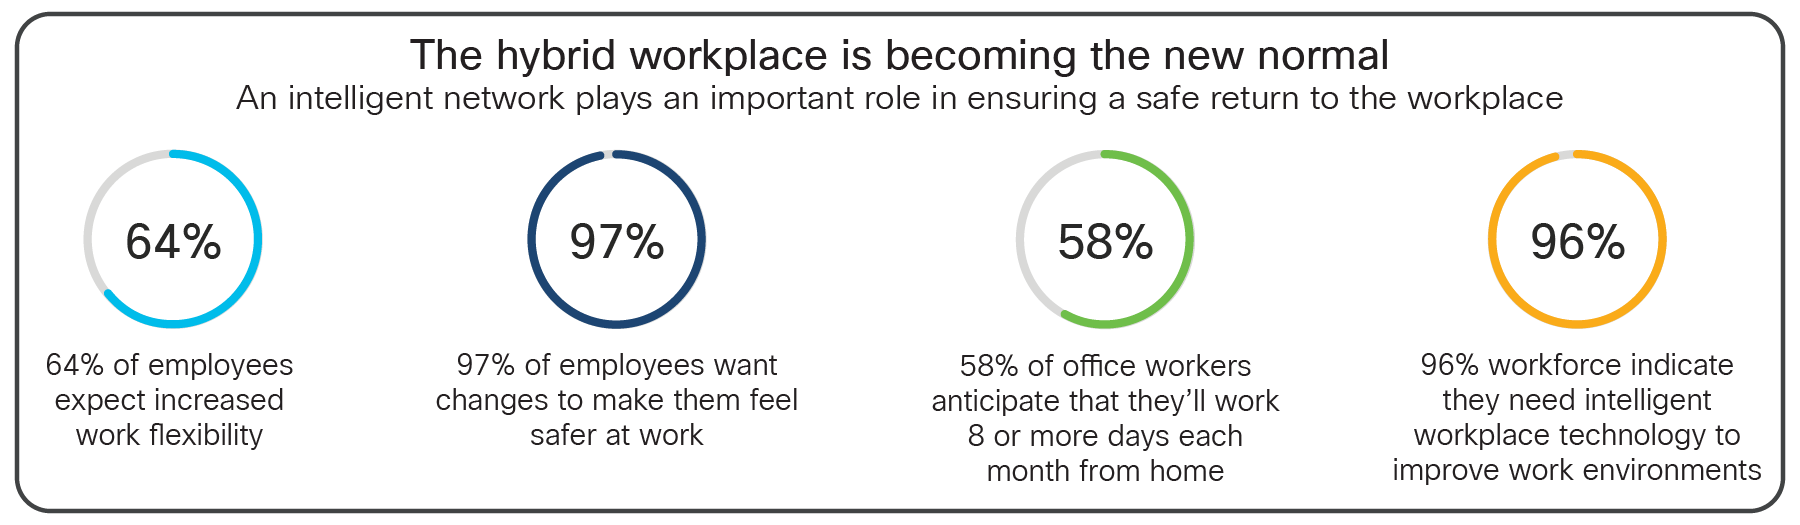 Hybrid workplace is becoming the new normal